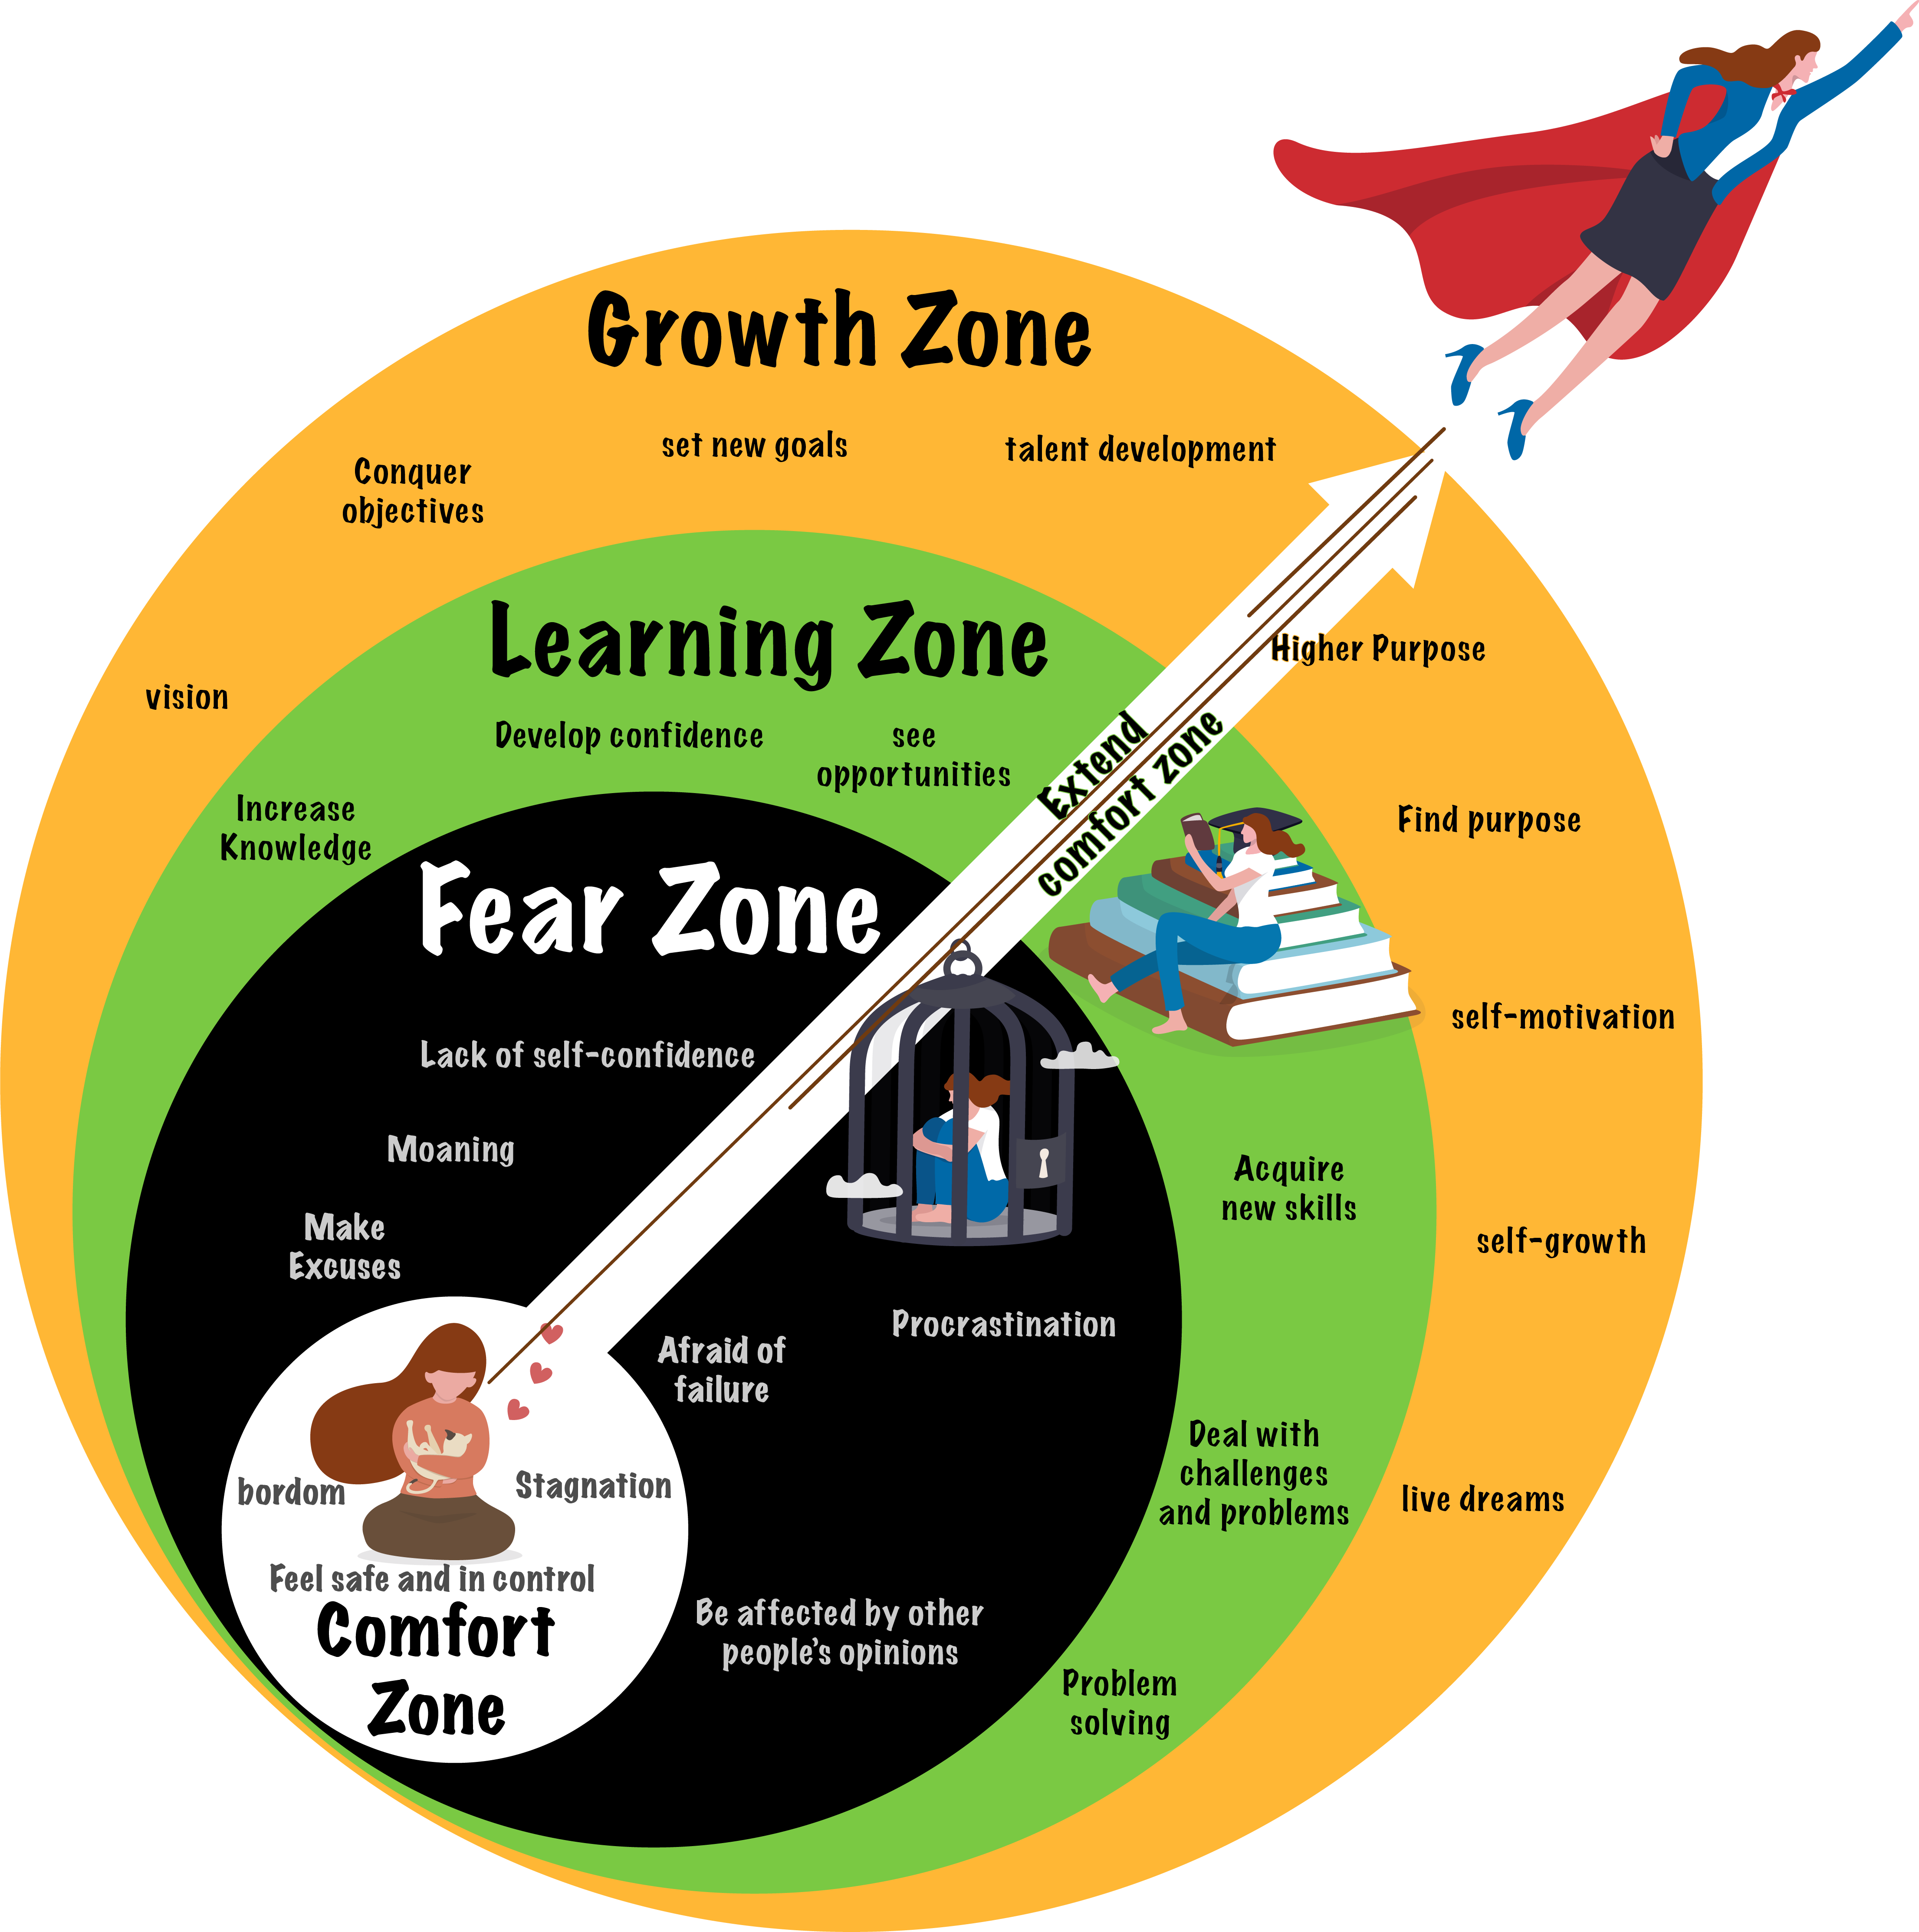 Fear stops us from leaving the Comfort Zone, but also prevents us from moving into the Learning Zone. Make fears conscious, then fear no longer holds you back. You can move through fear after you acknowledge it.